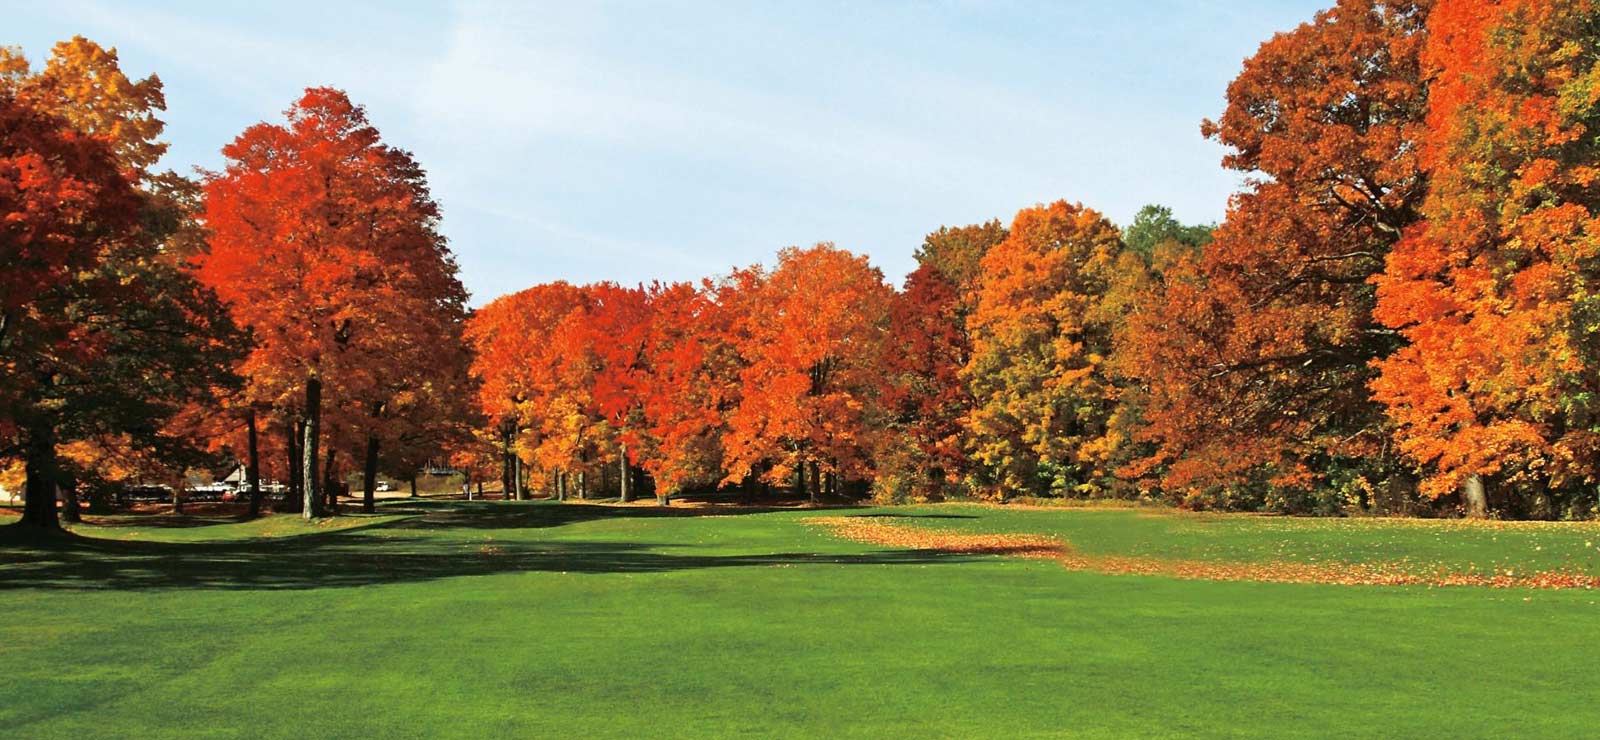 A picture of a large yard during fall with bright red and yellow colors on the trees